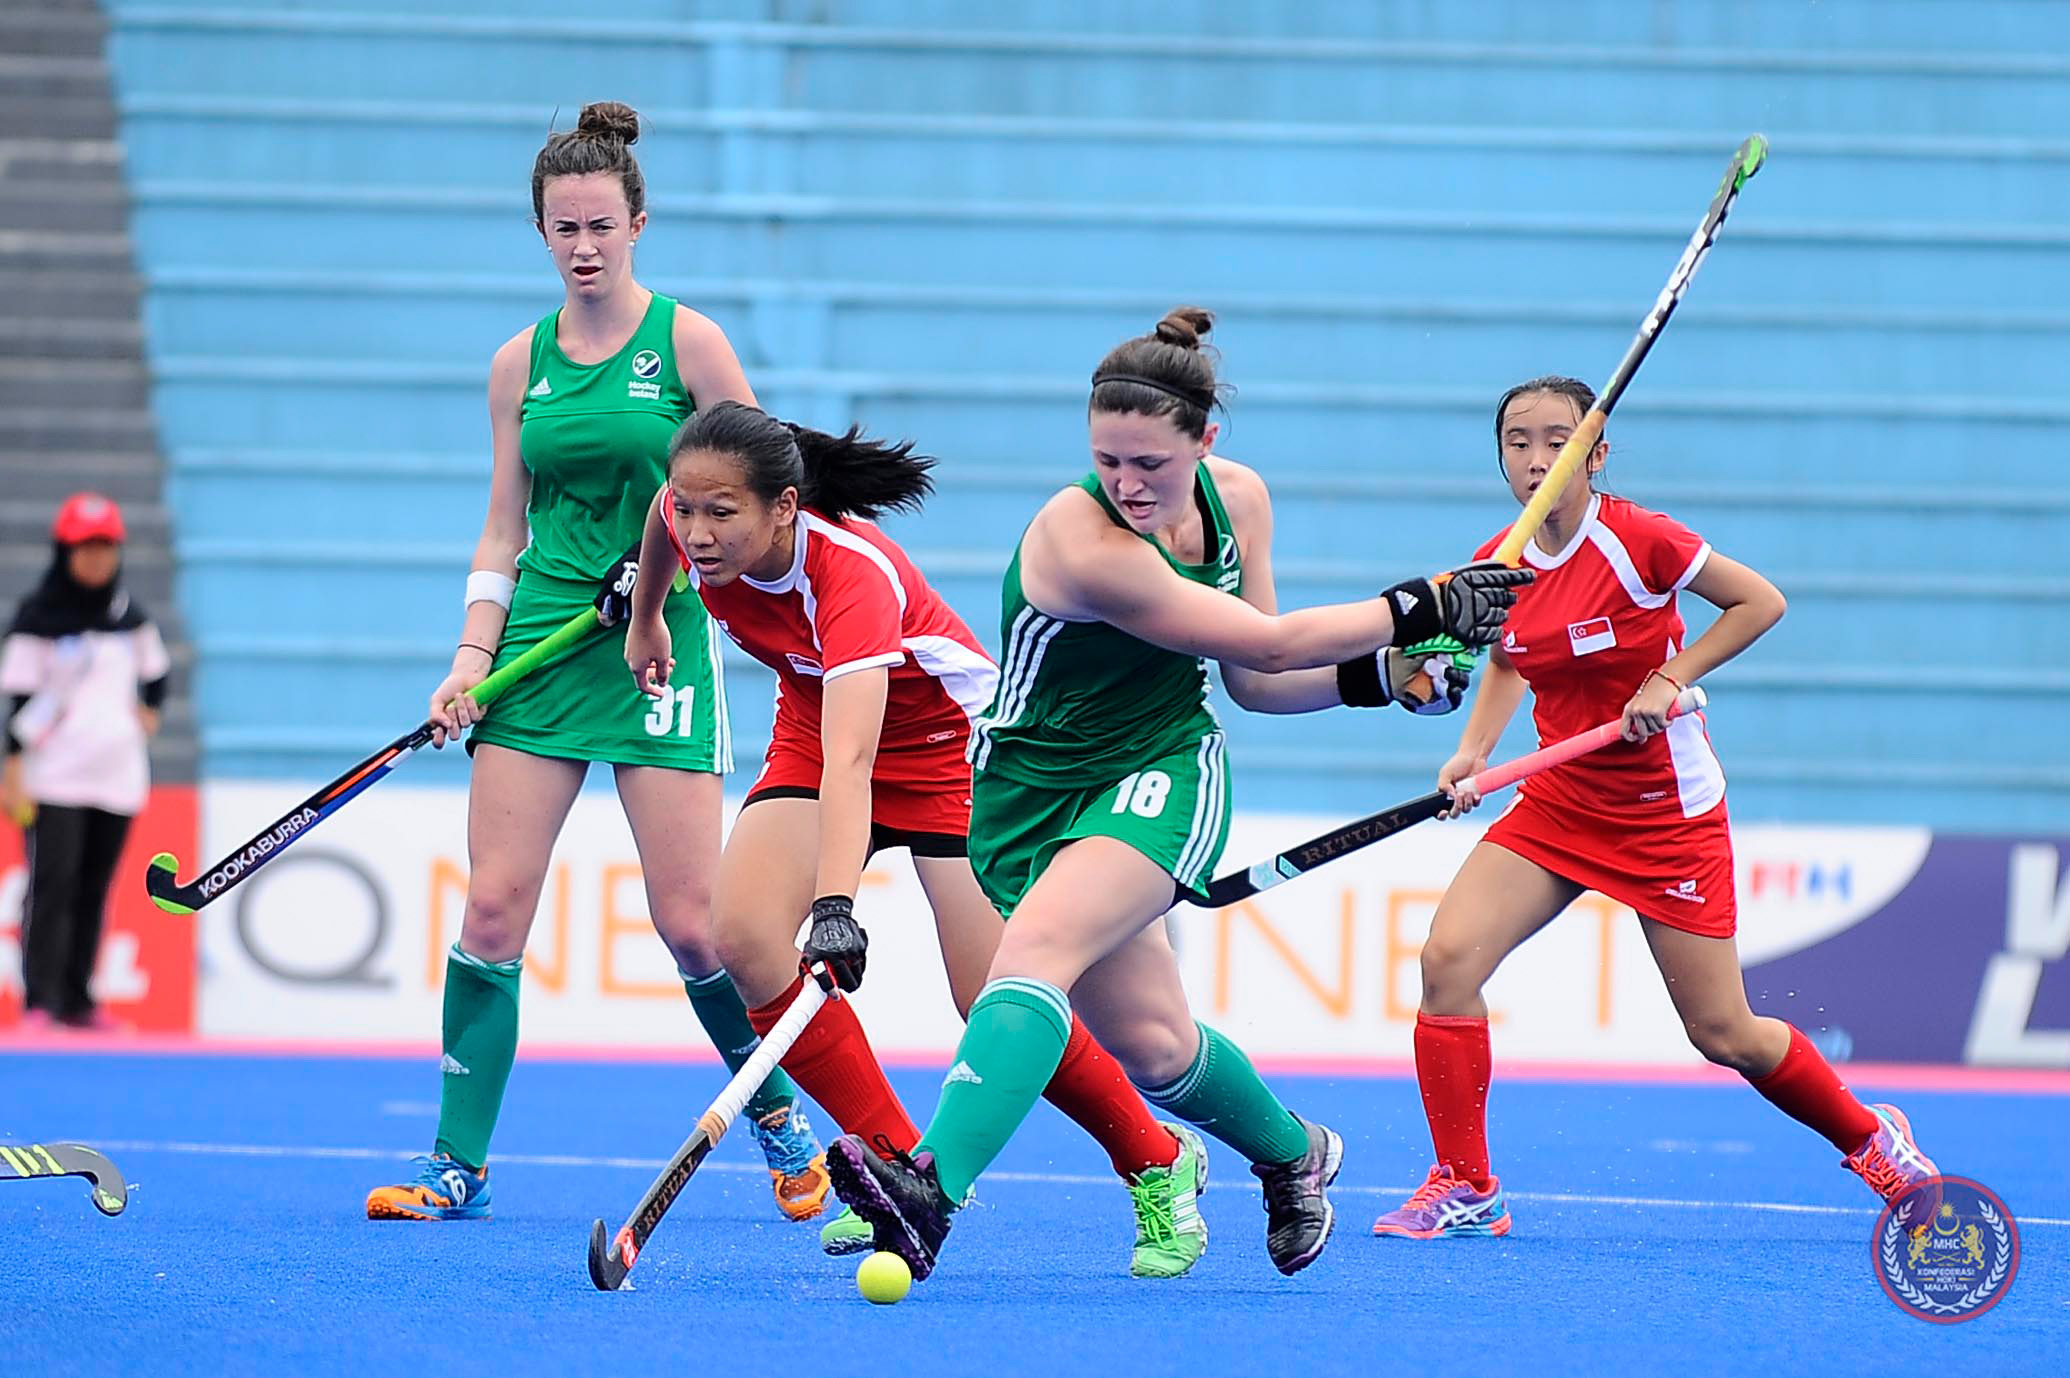 Former UConn standout Roisin Upton '16 (ED) swings at the ball during a game against Hong Kong in South Africa in January. Since graduating, Upton traded her UConn blue jersey for the green of the Irish National Team.